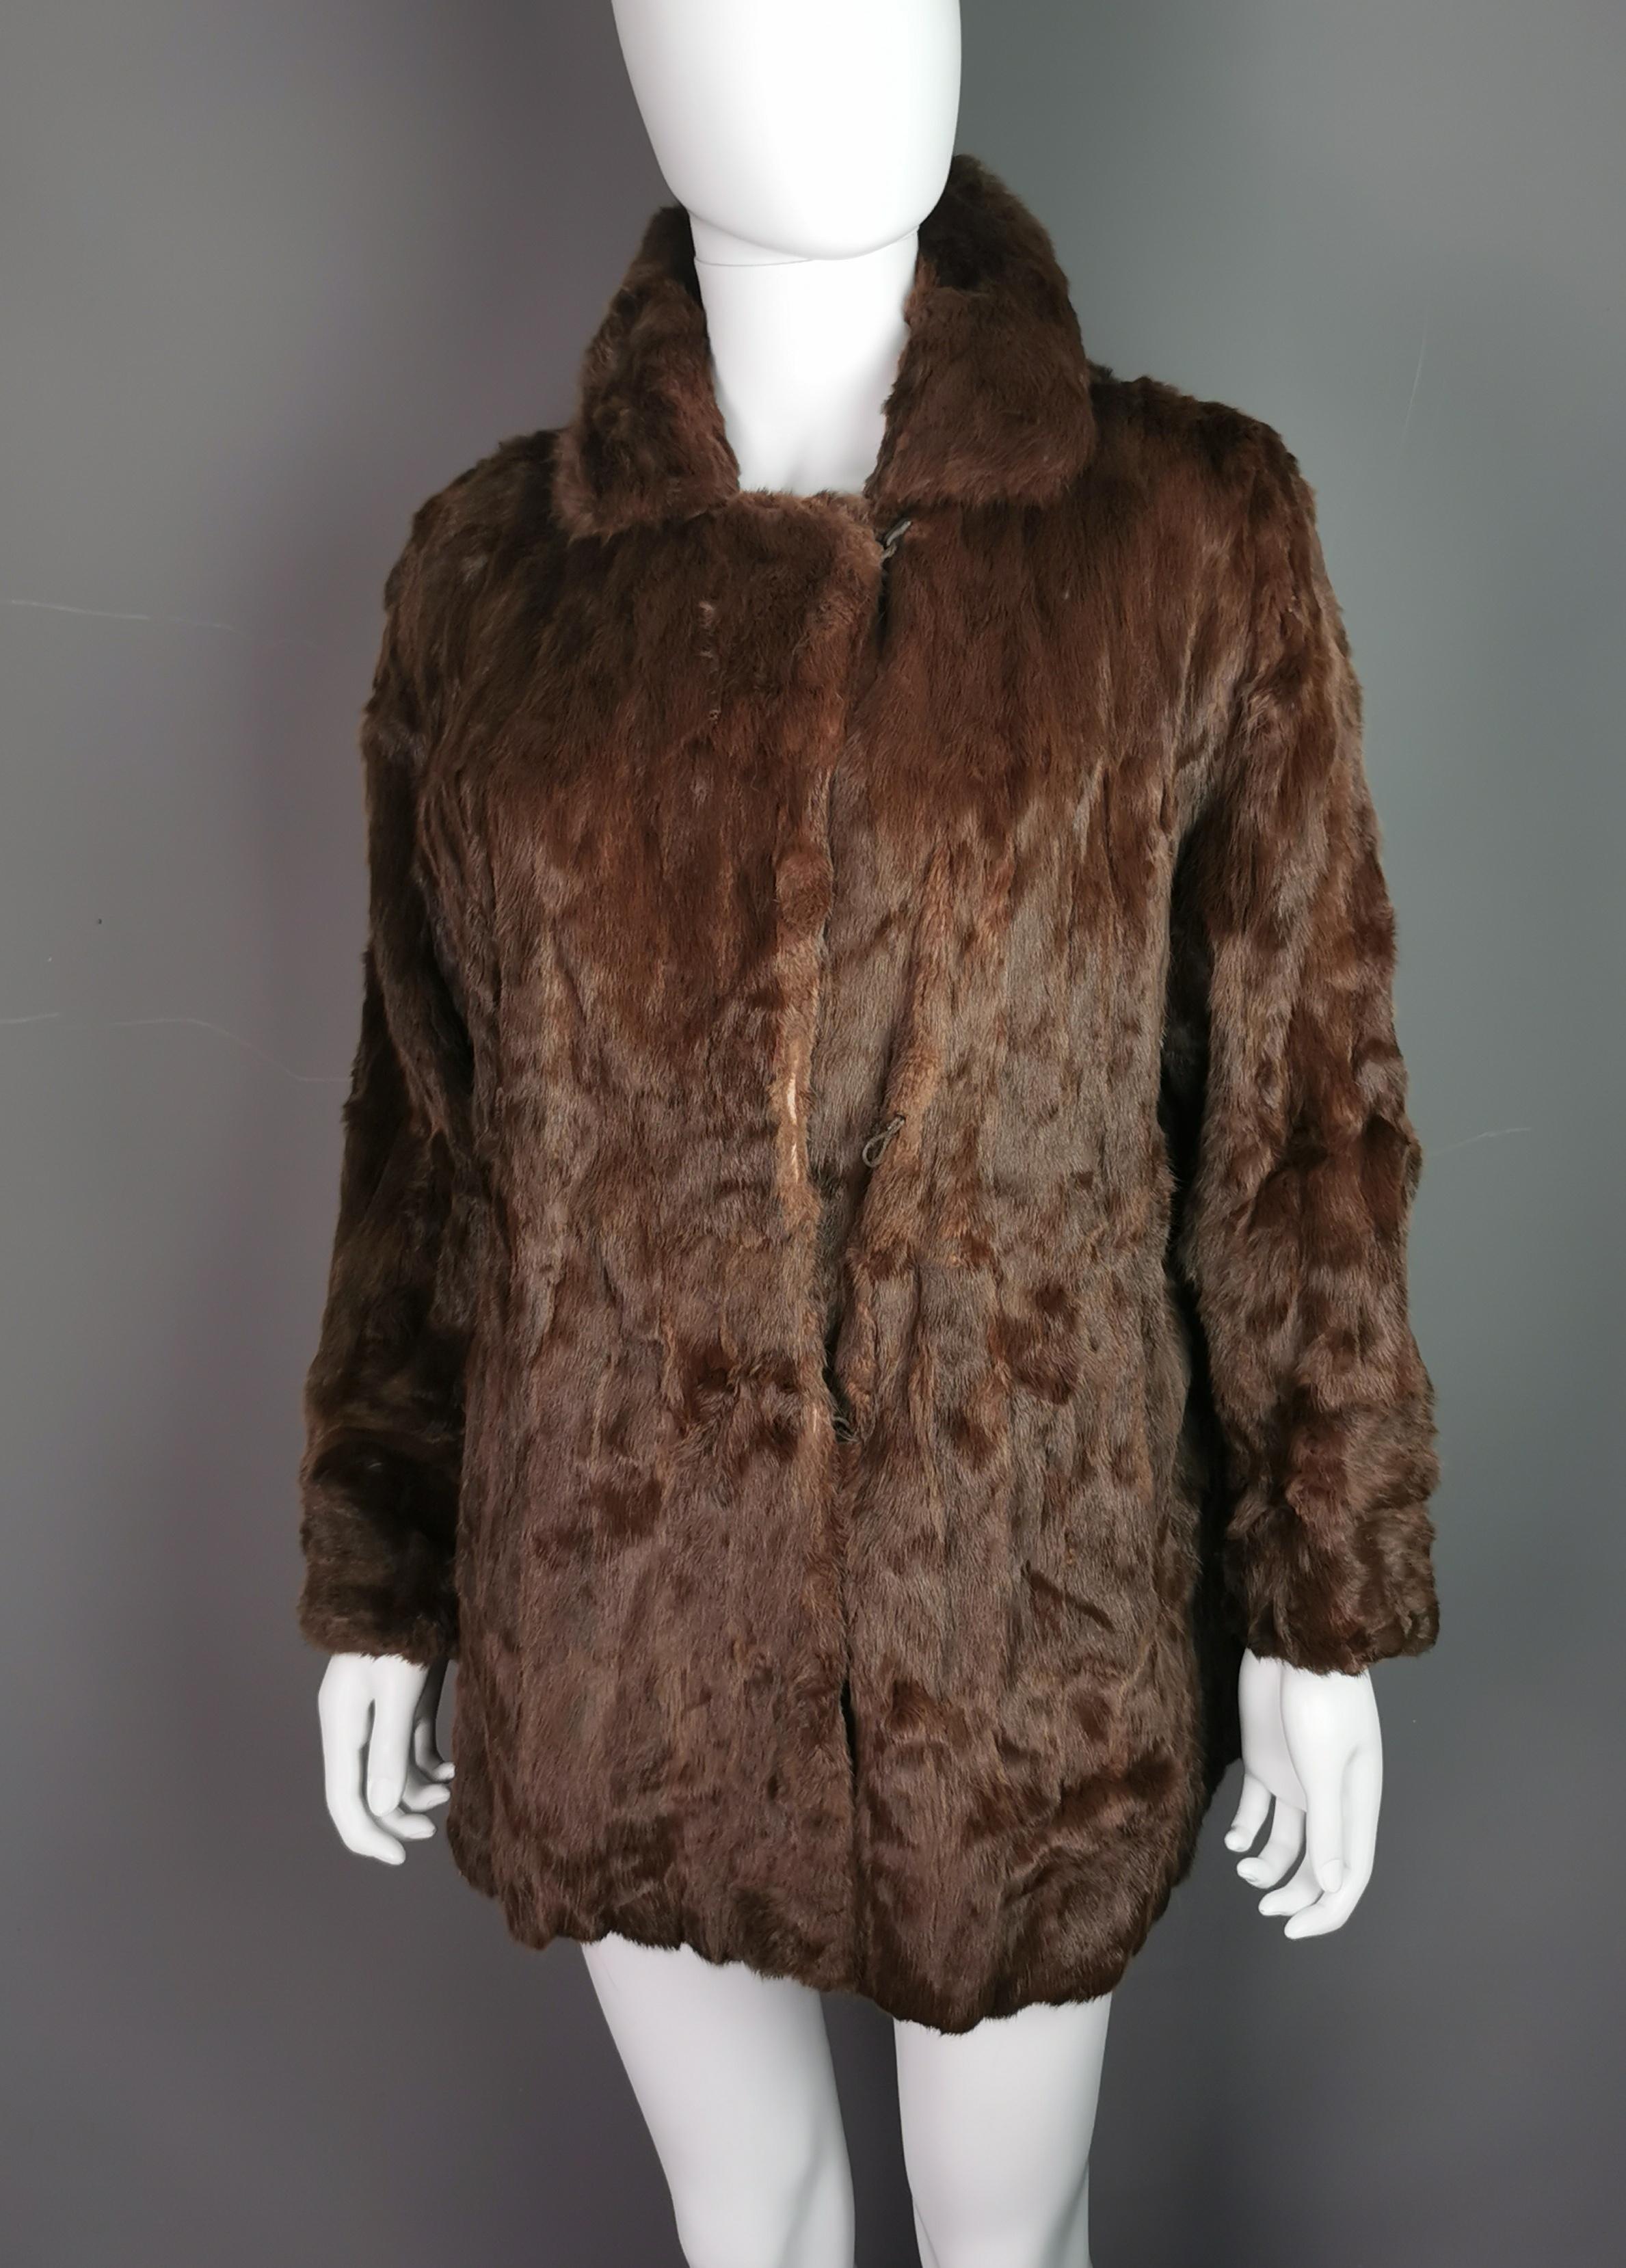 A fine quality vintage mink fur jacket by Clyne.

It is made from mahogany brown mink fur, superbly soft and lined in a chocolate brown satin.

It has a nice wide collar with a half belt design to the back.

It hook fastenings to the front and is